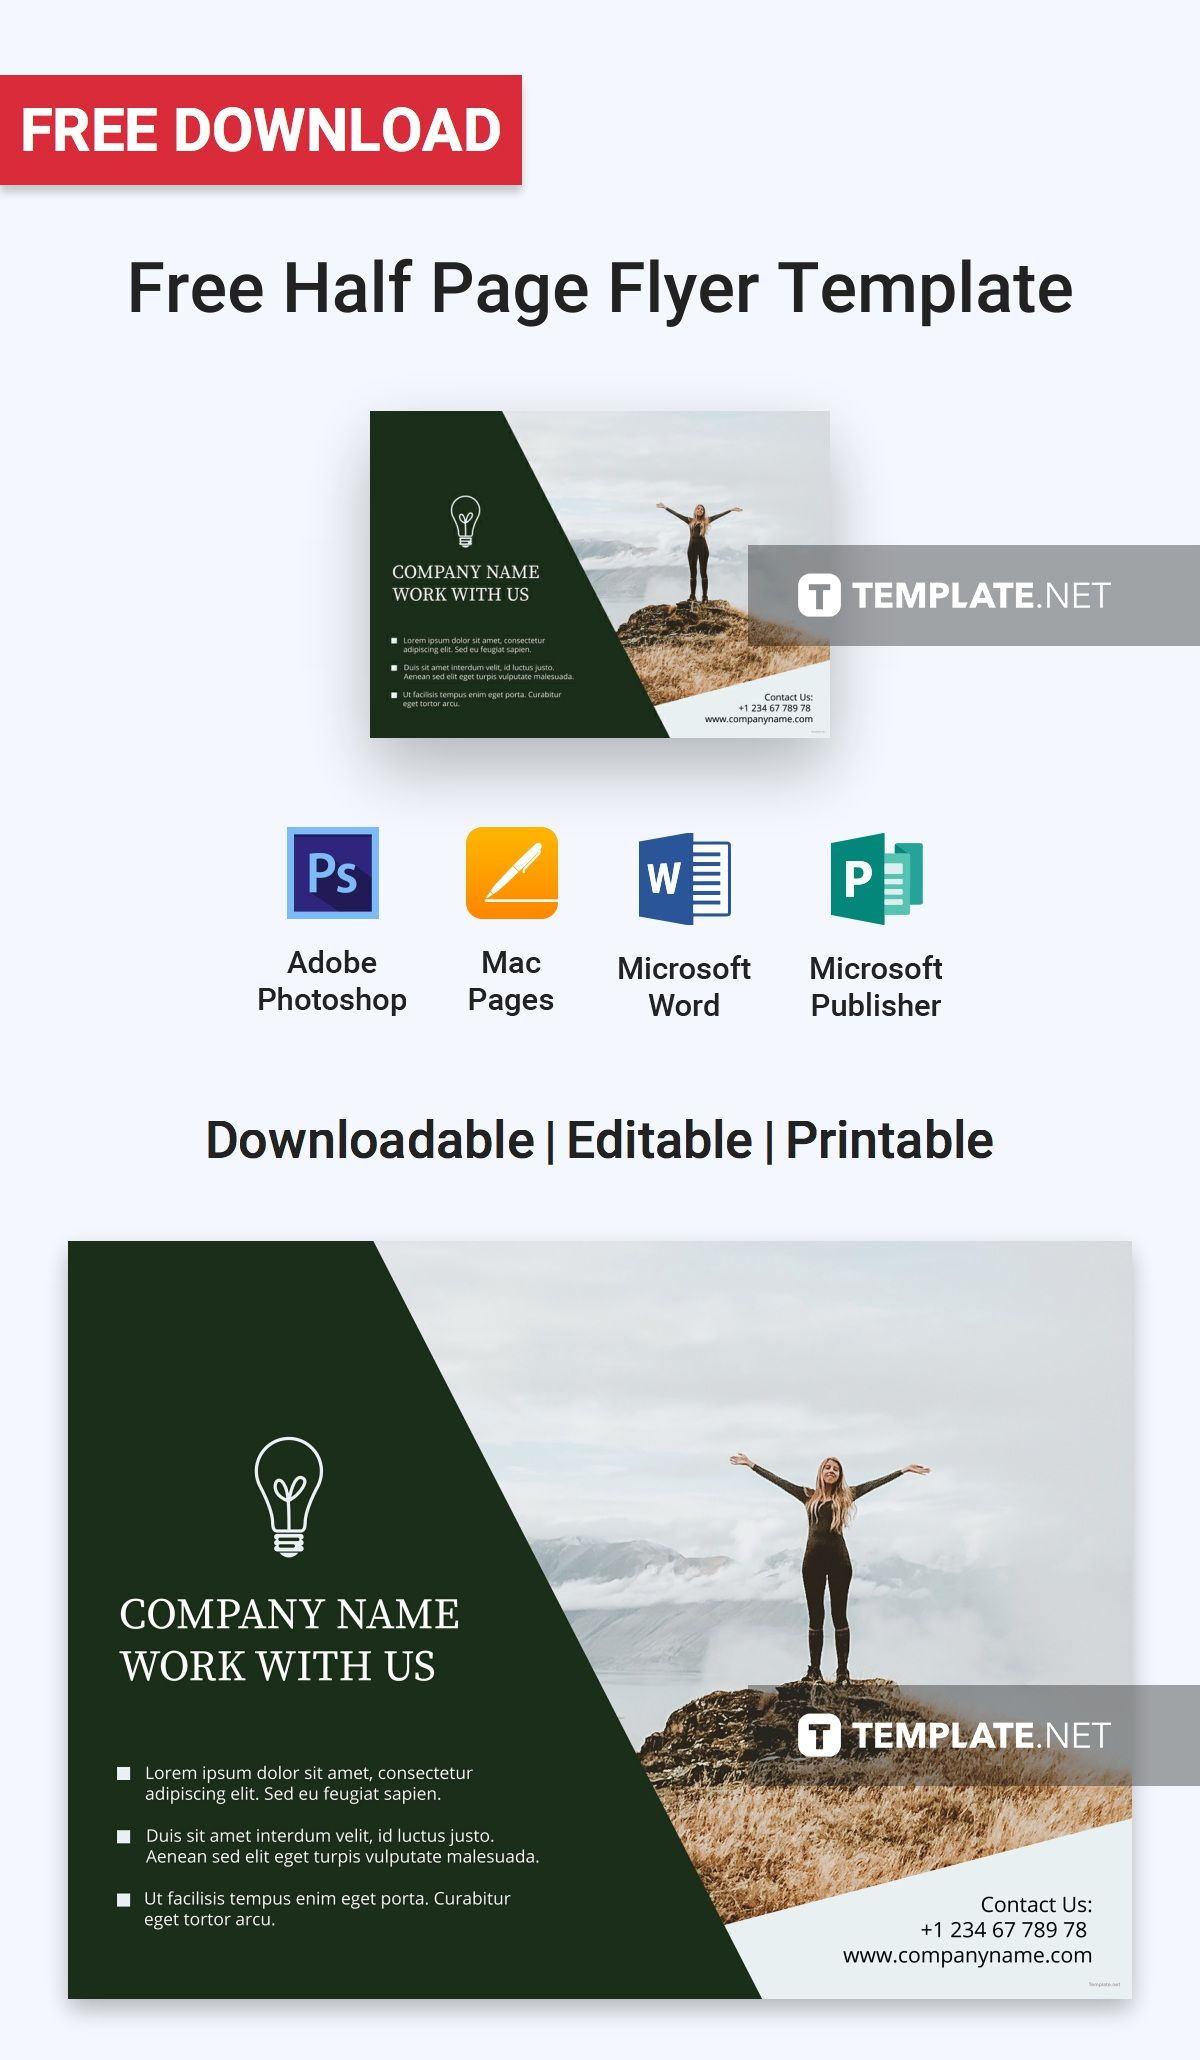 Free Half Page Flyer | Flyer Templates & Designs 2019 For Half Page Brochure Template